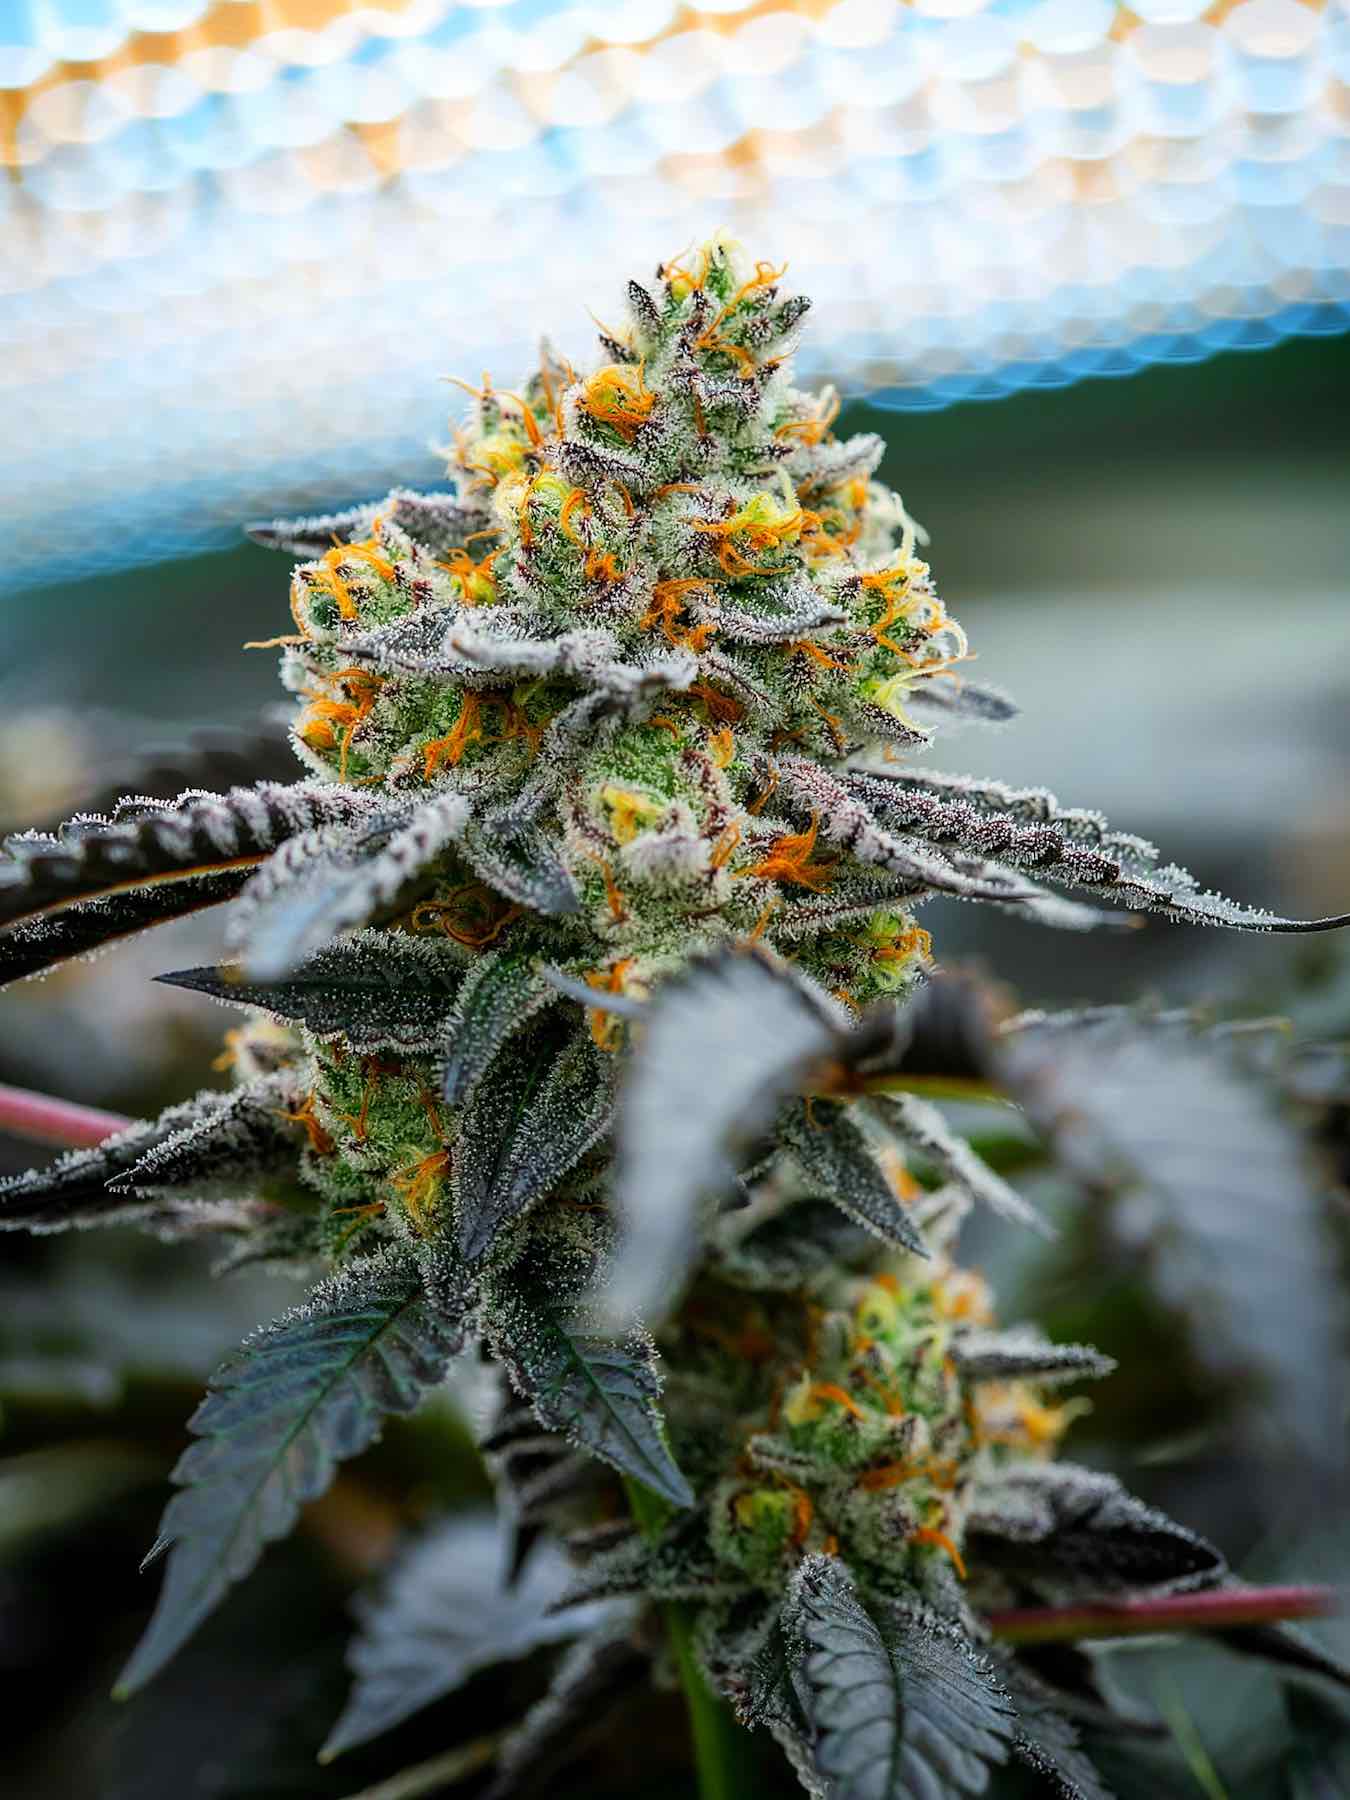 Meat Breath bred by gromerjuana of Michigan is a top strain of the summer 2020. (Courtesy Deschutes Growery)